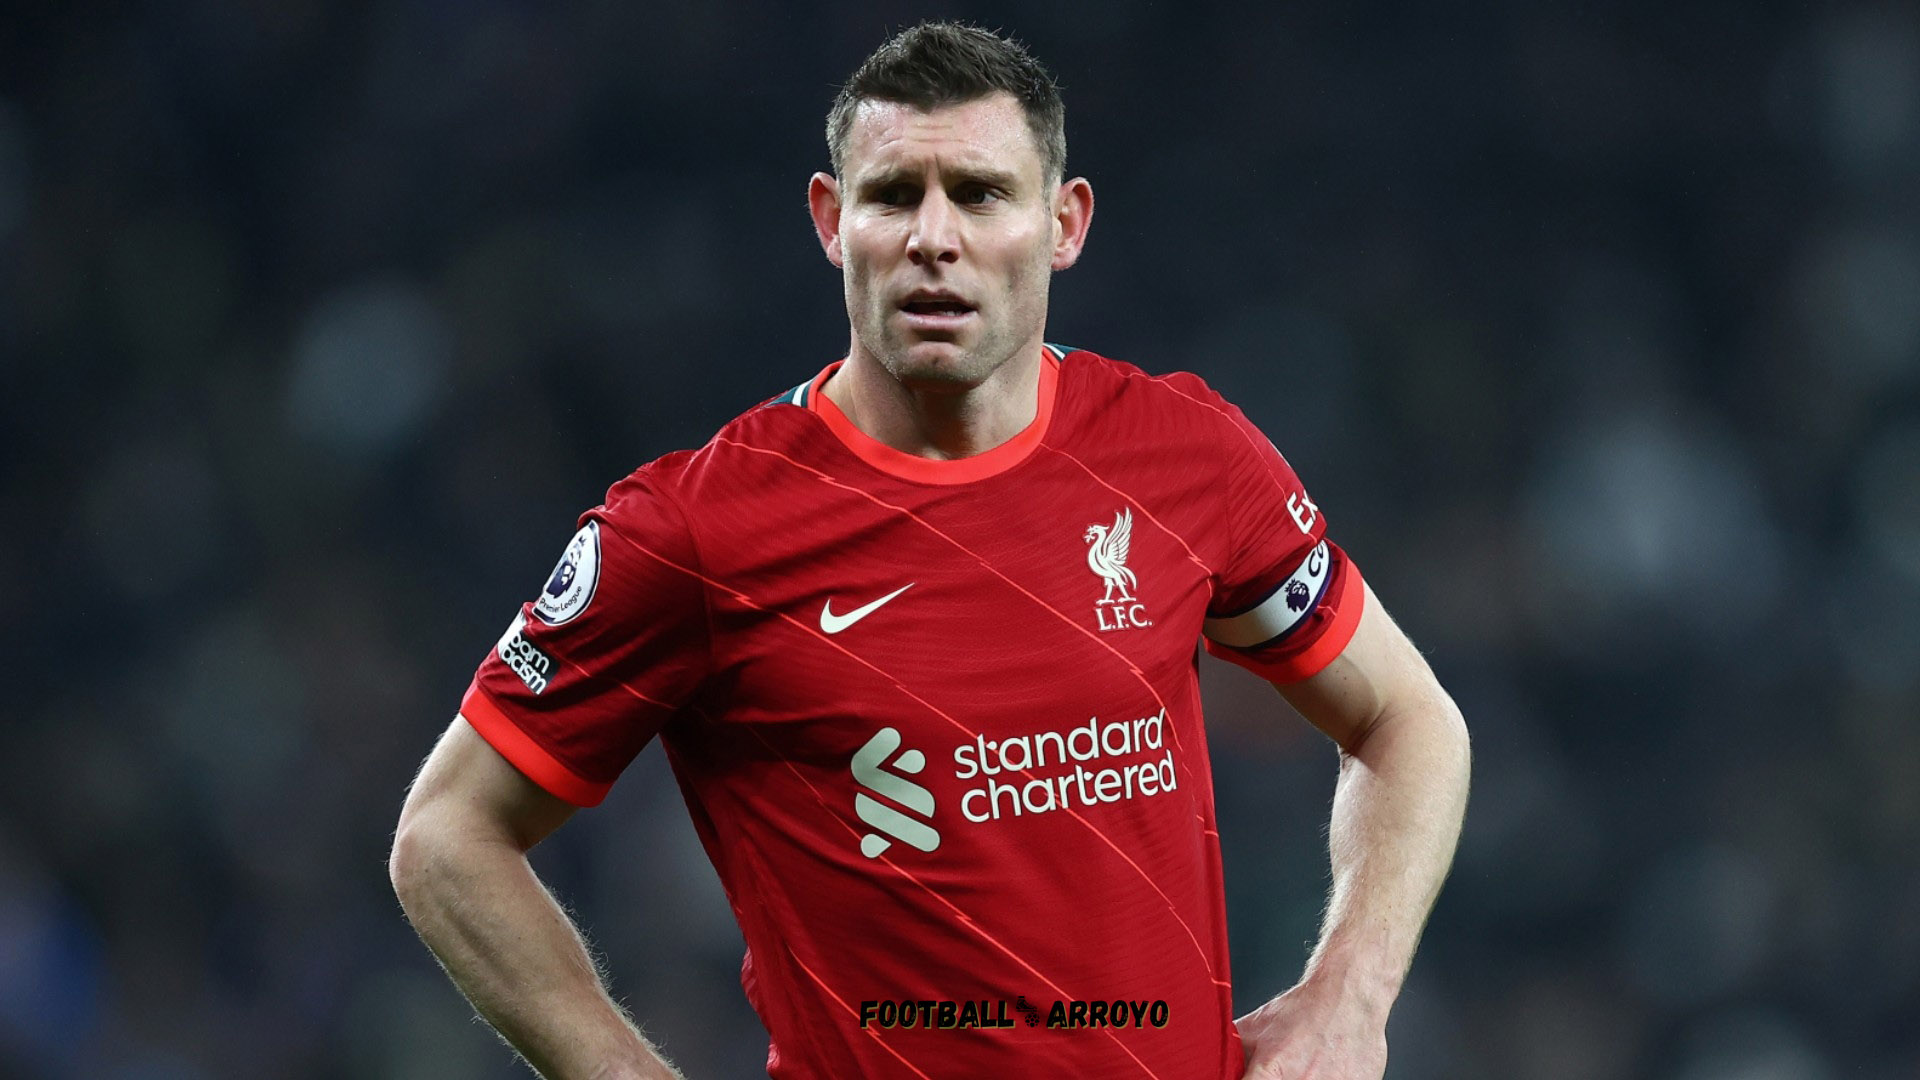 James Milner age, salary and net worth in 2022, wife, facts, football Career